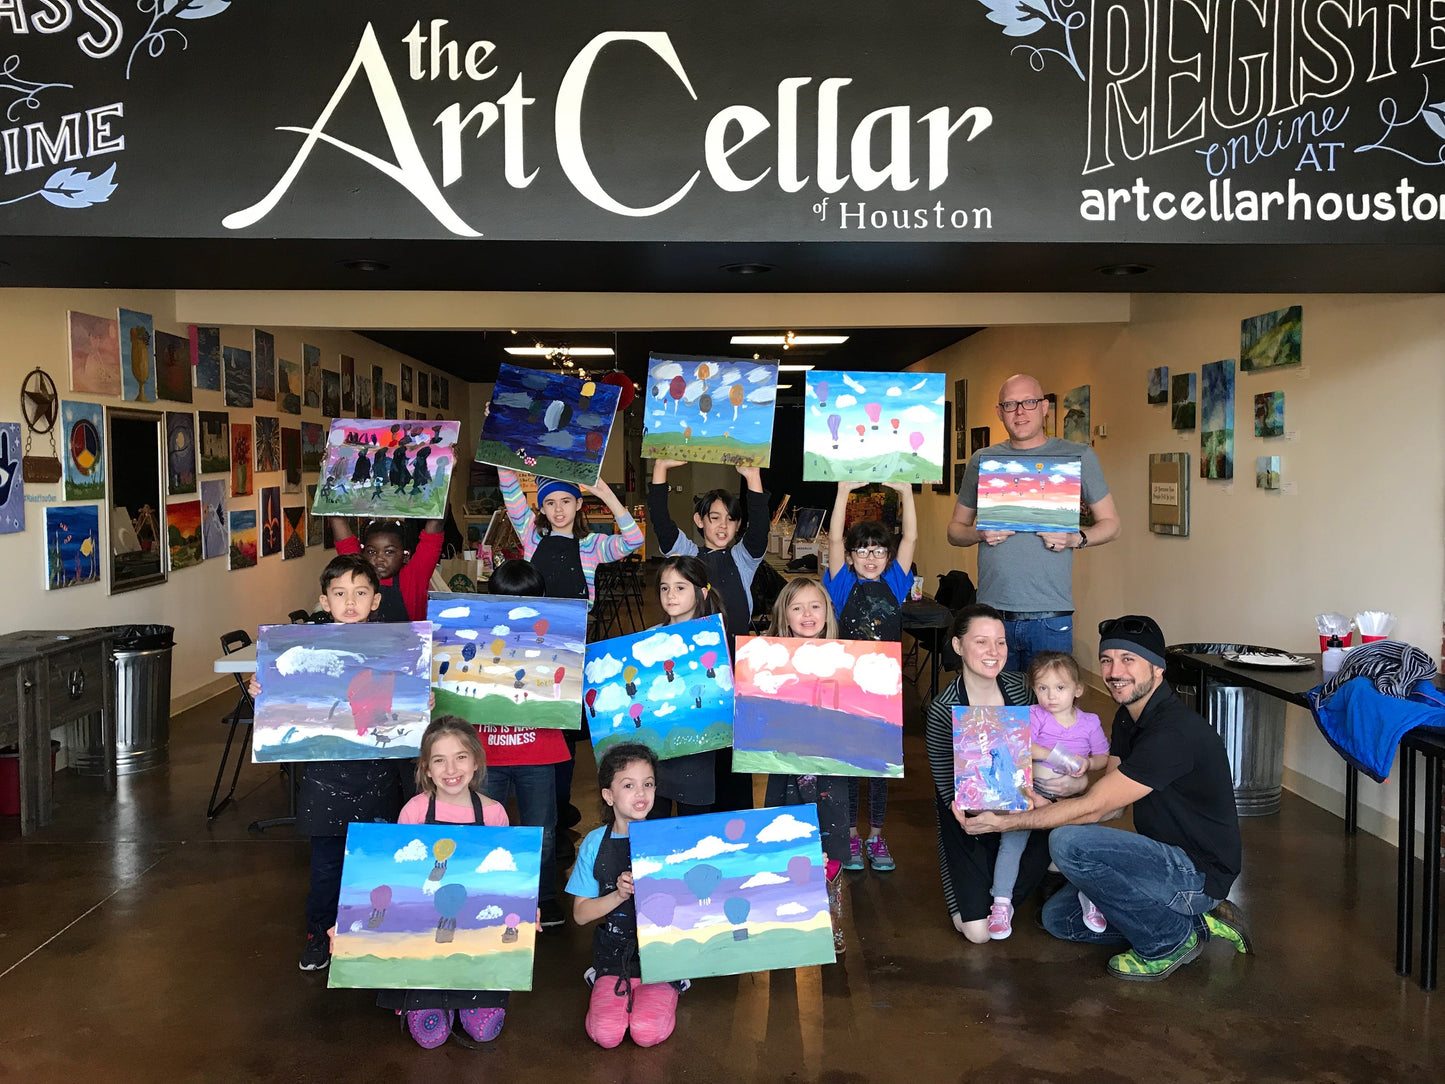 Wed, Jun 21st, 6-8P “Bunny's Day” Private Houston Kids Painting Party